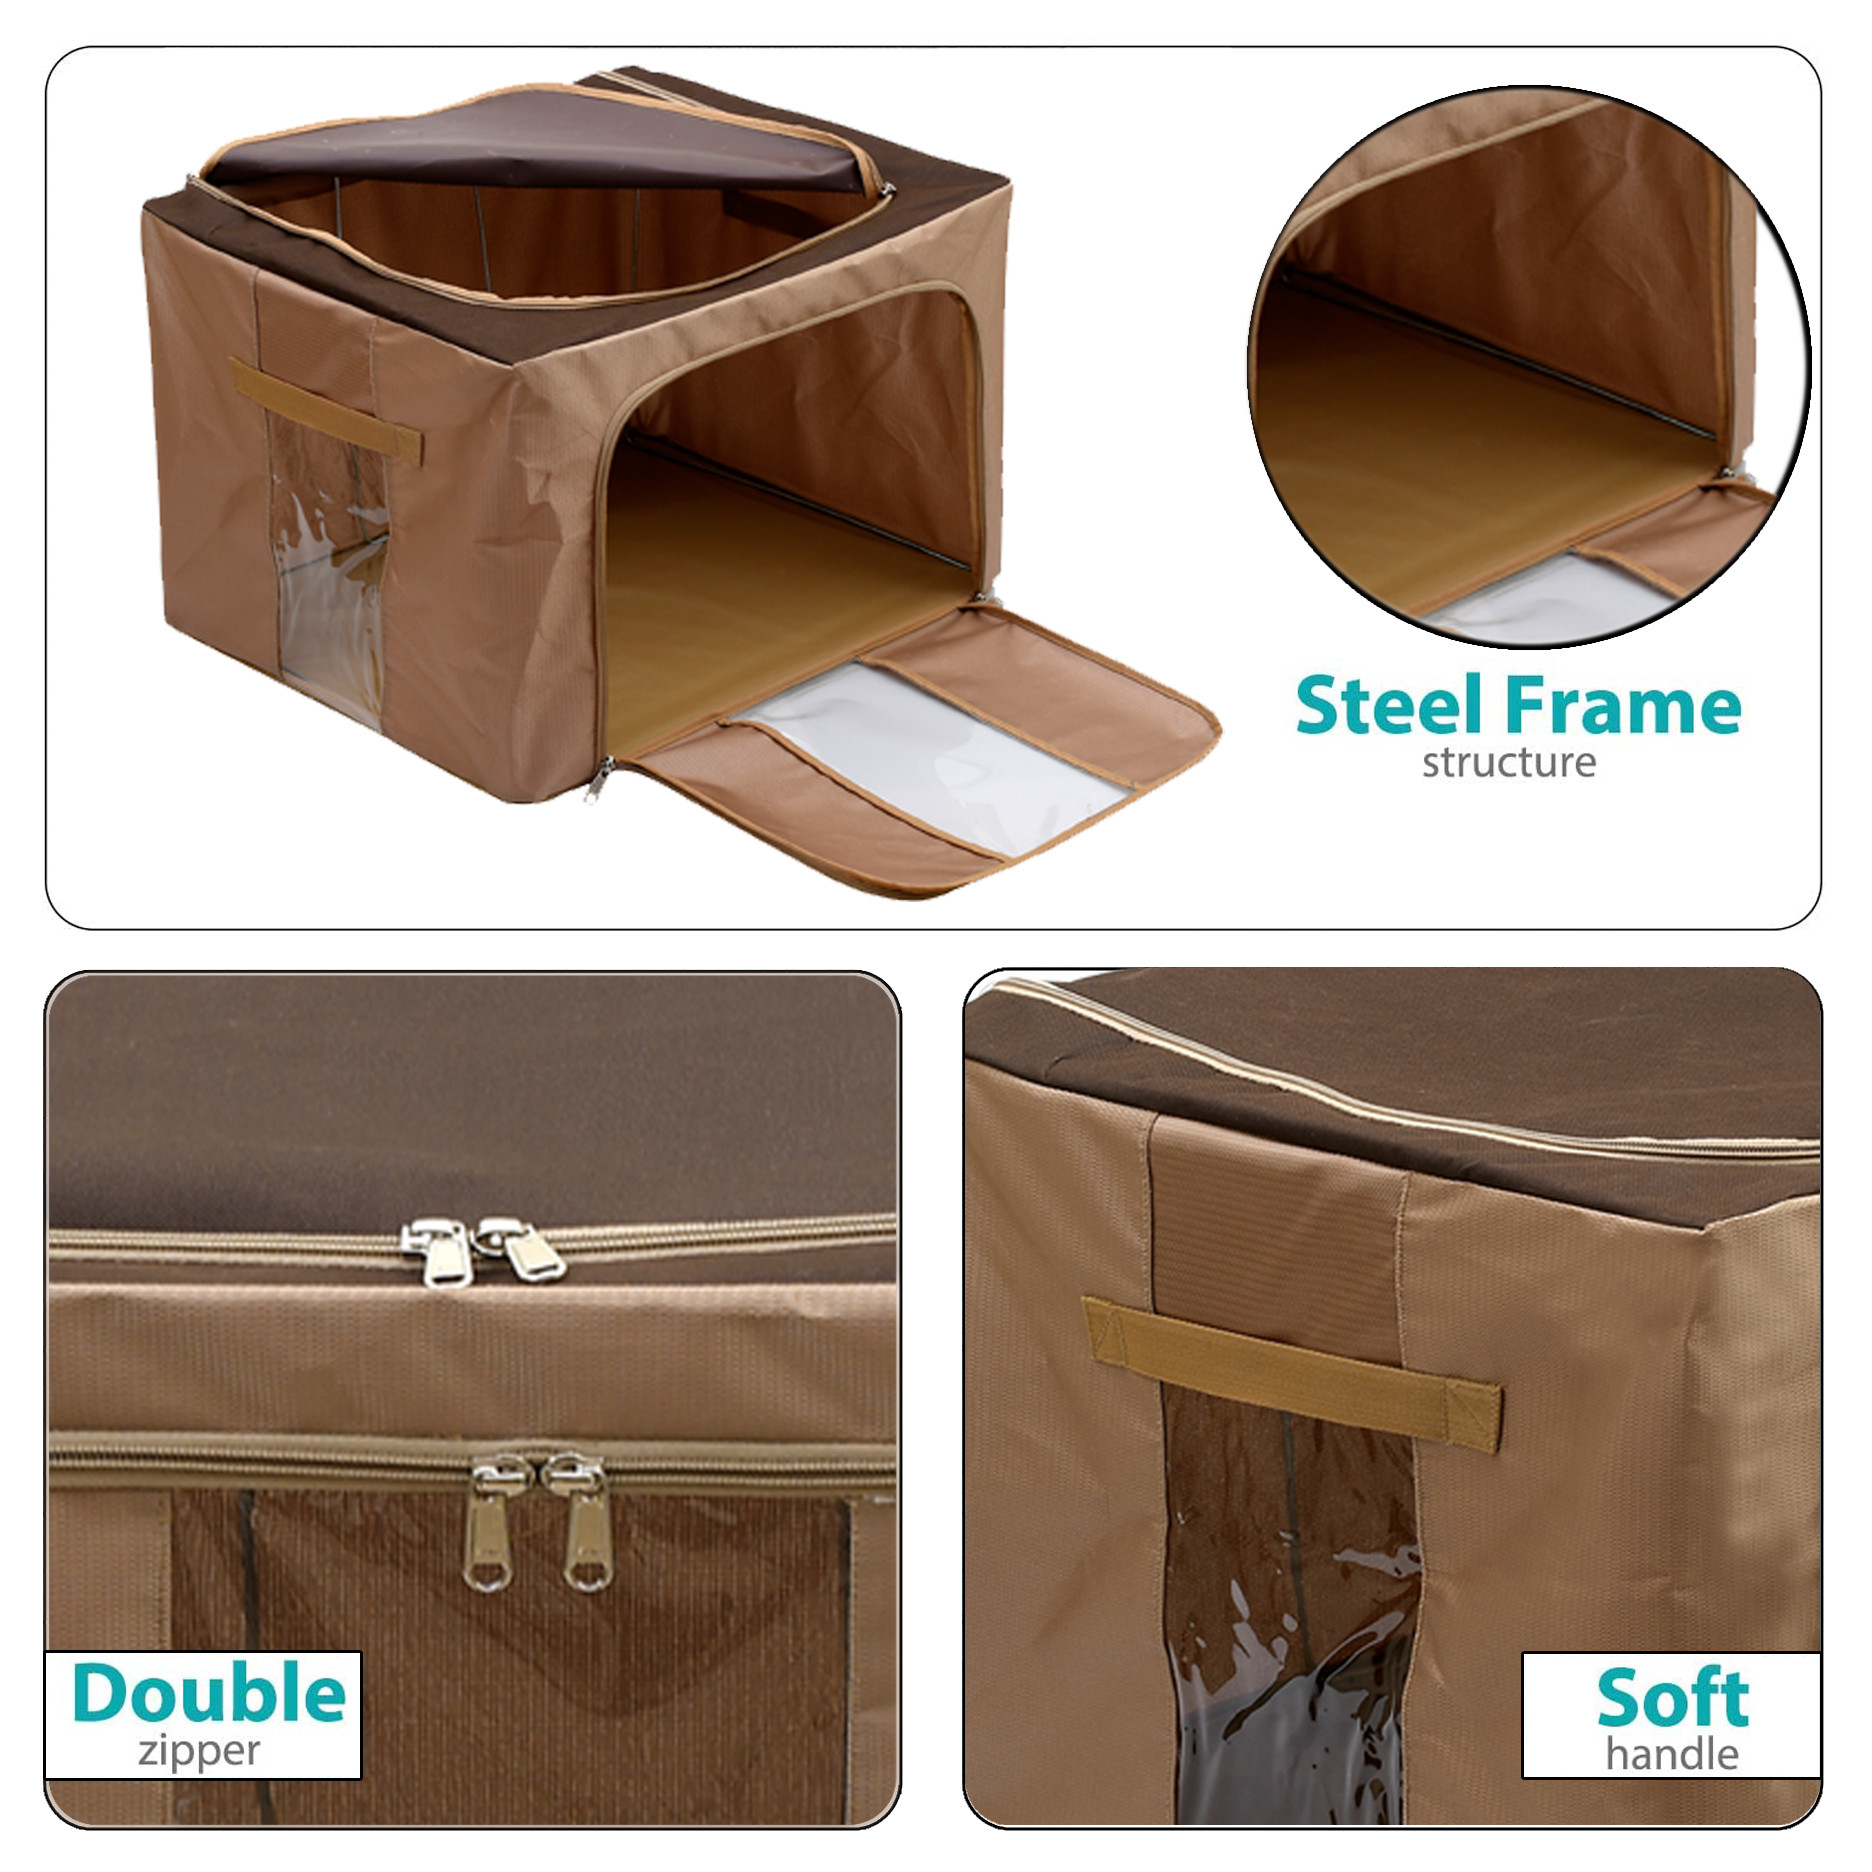 Kuber Industries Steel Frame Storage Box/Organizer For Clothing, Blankets, Bedding With Clear Window, 24Ltr. (Brown)-44KM0281